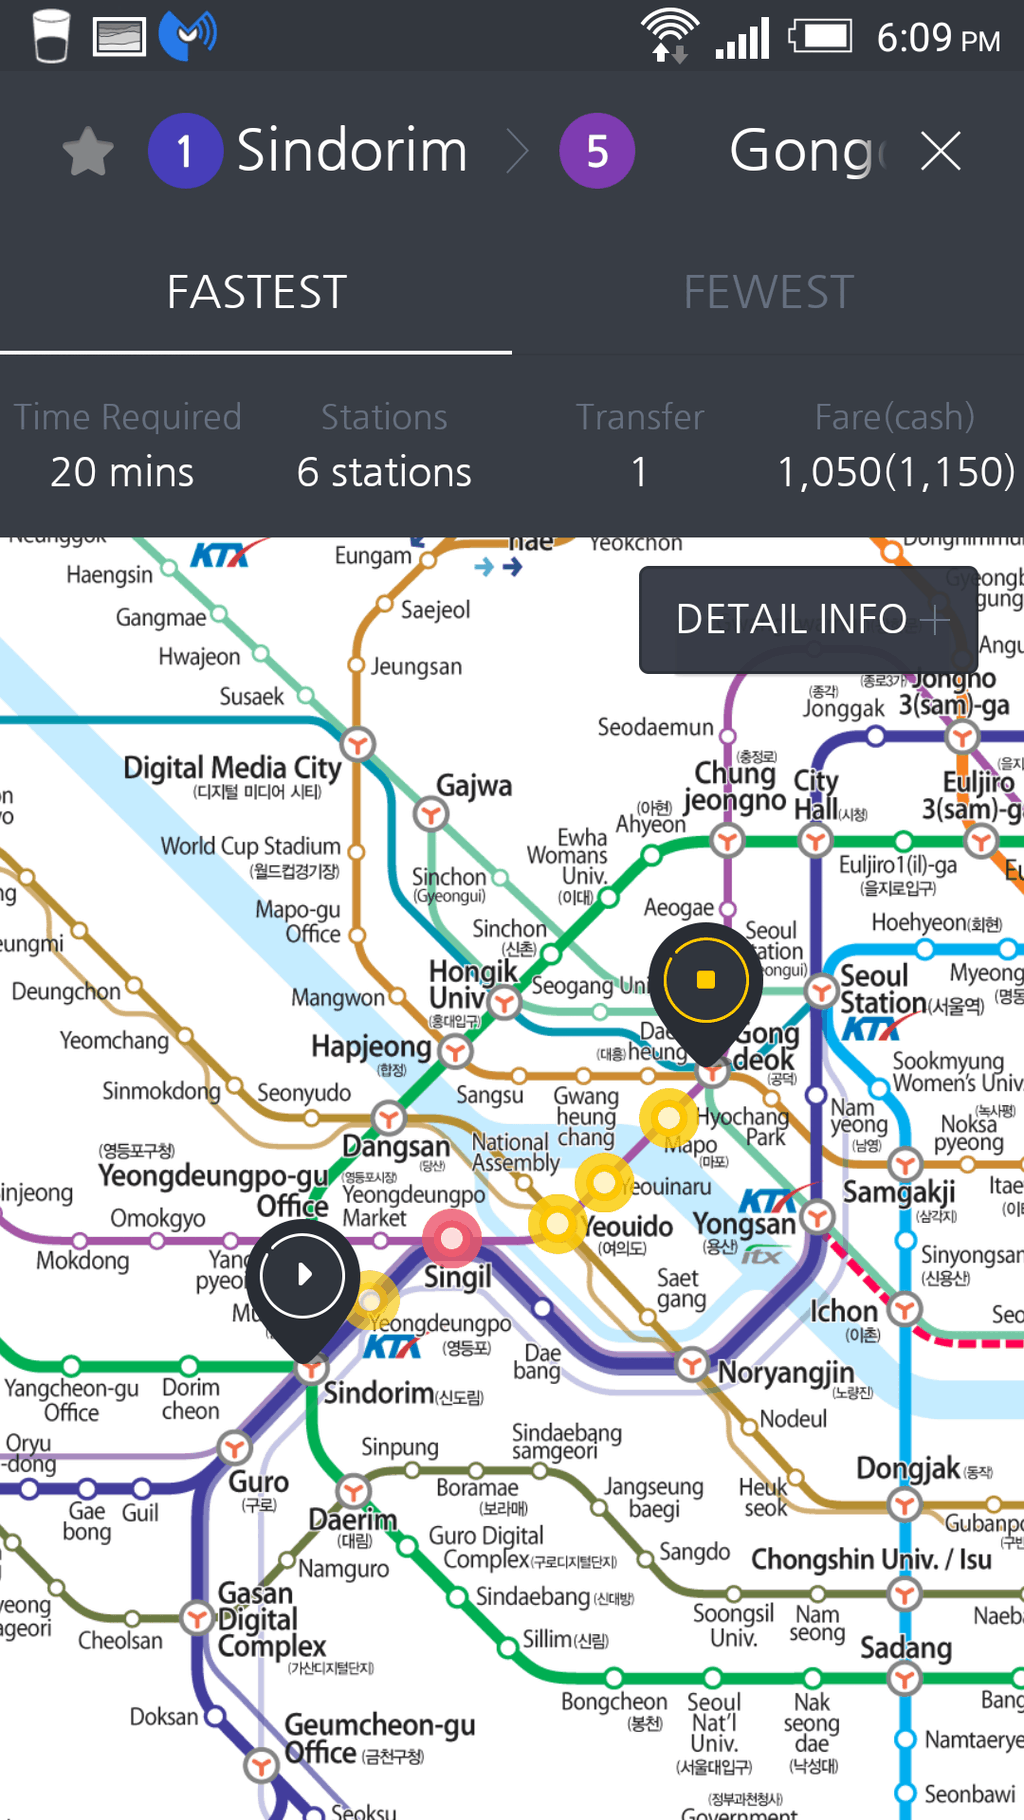 fastest route result on subway korea app